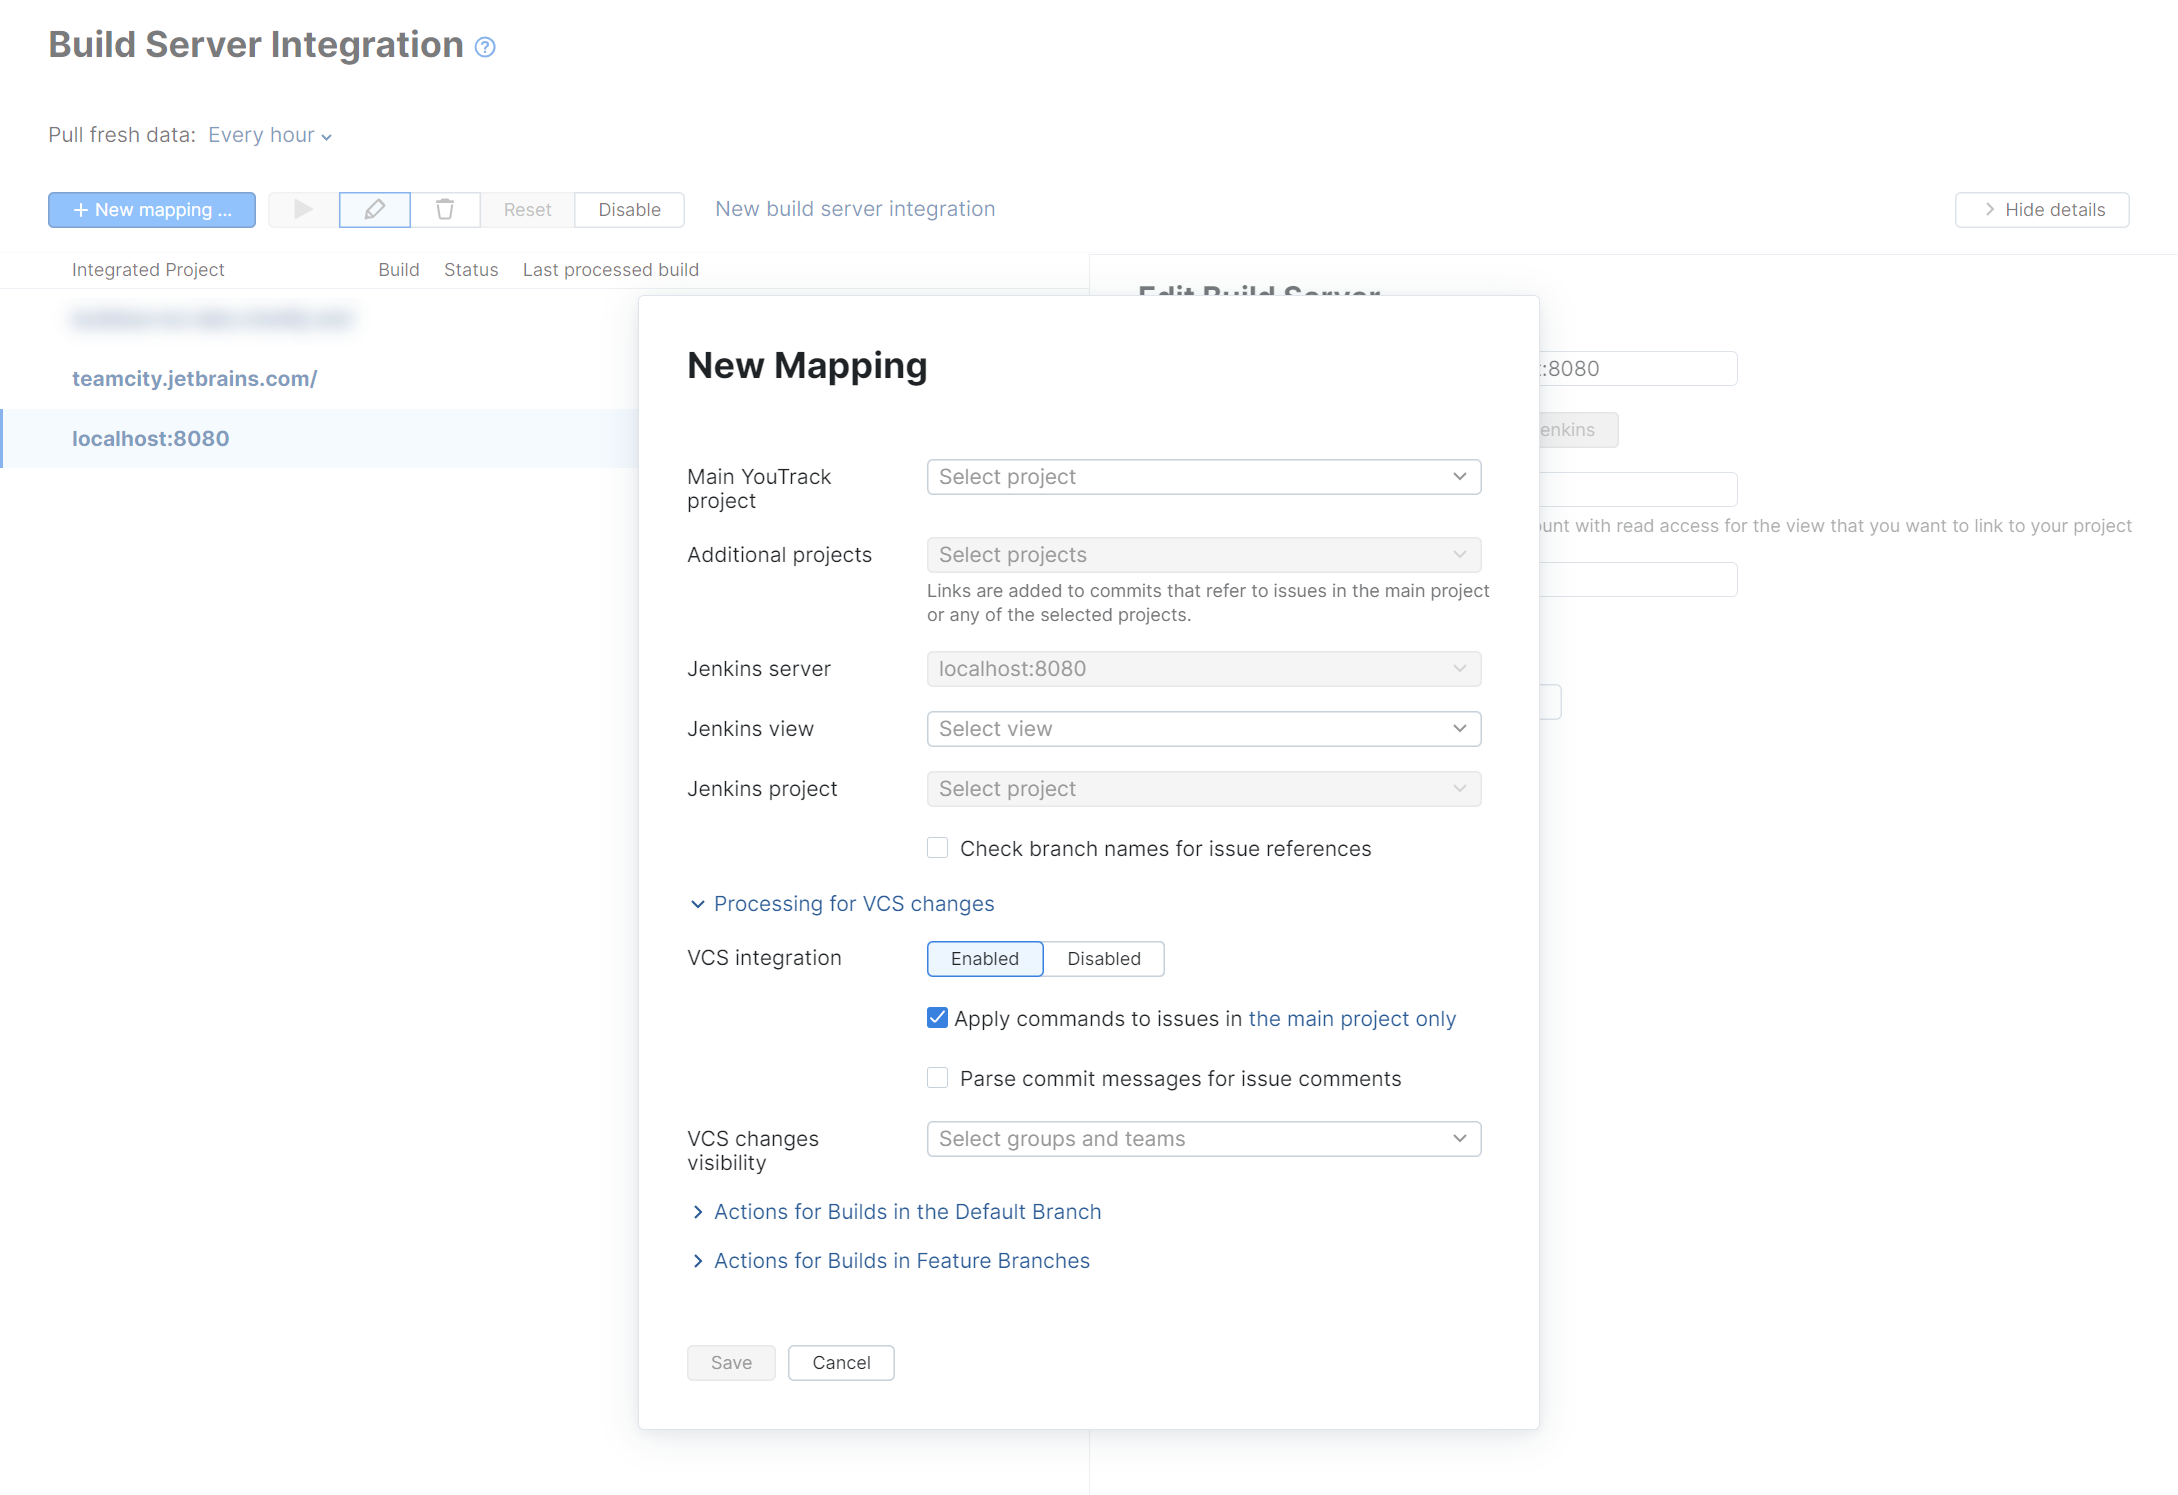 Mapping options for a Jenkins integration.